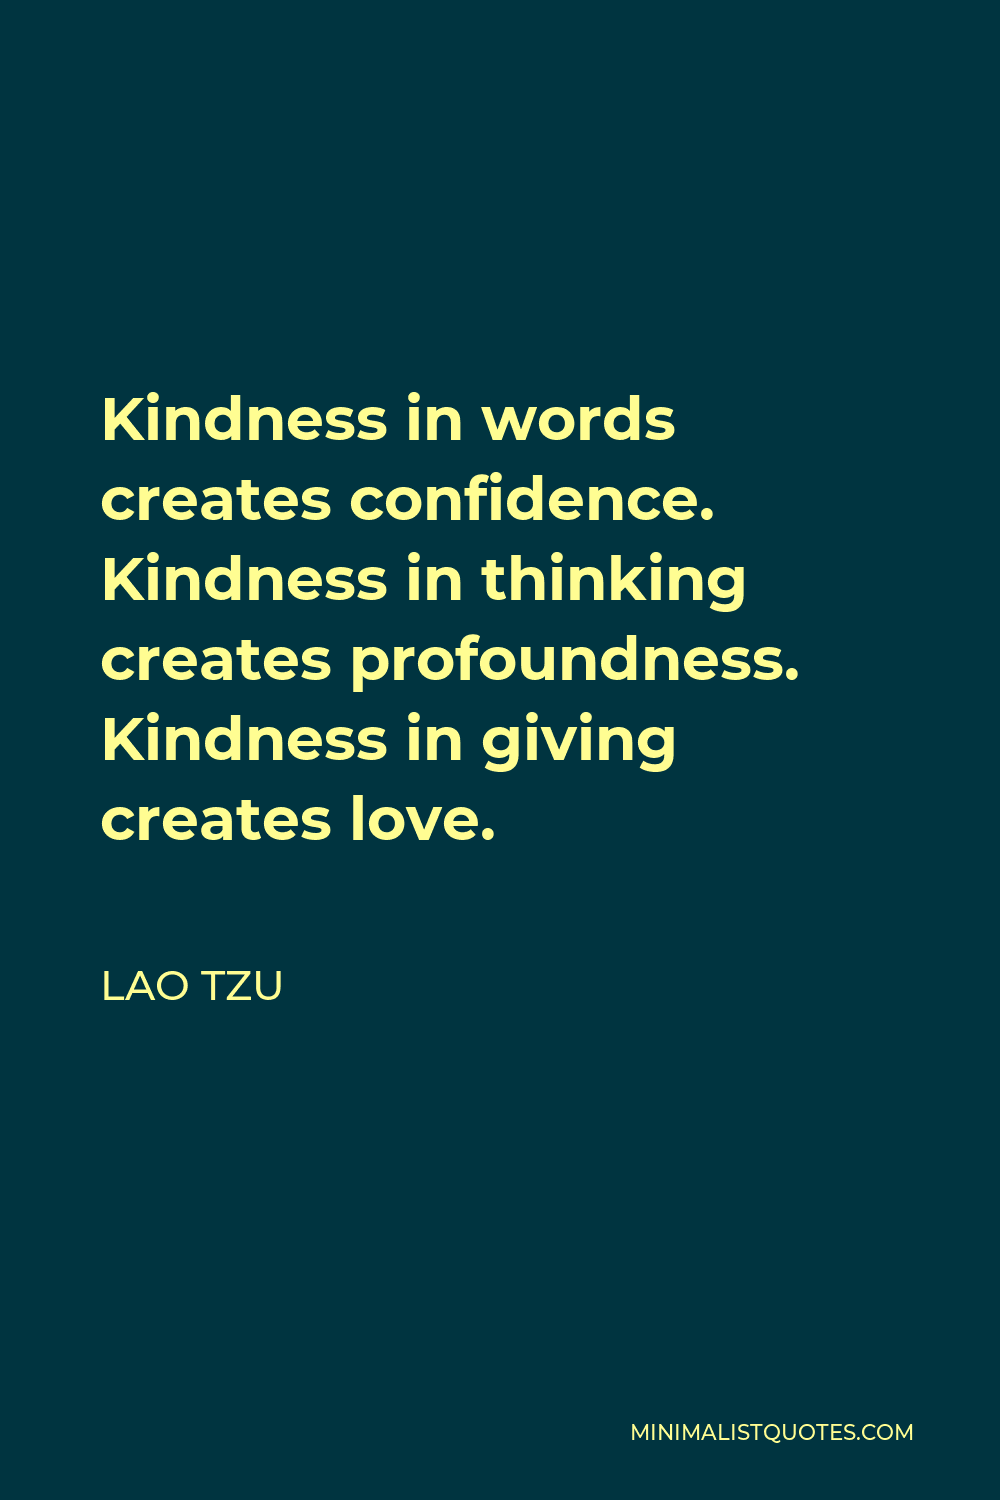 Lao Tzu Quote - Kindness in words creates confidence. Kindness in thinking creates profoundness. Kindness in giving creates love.